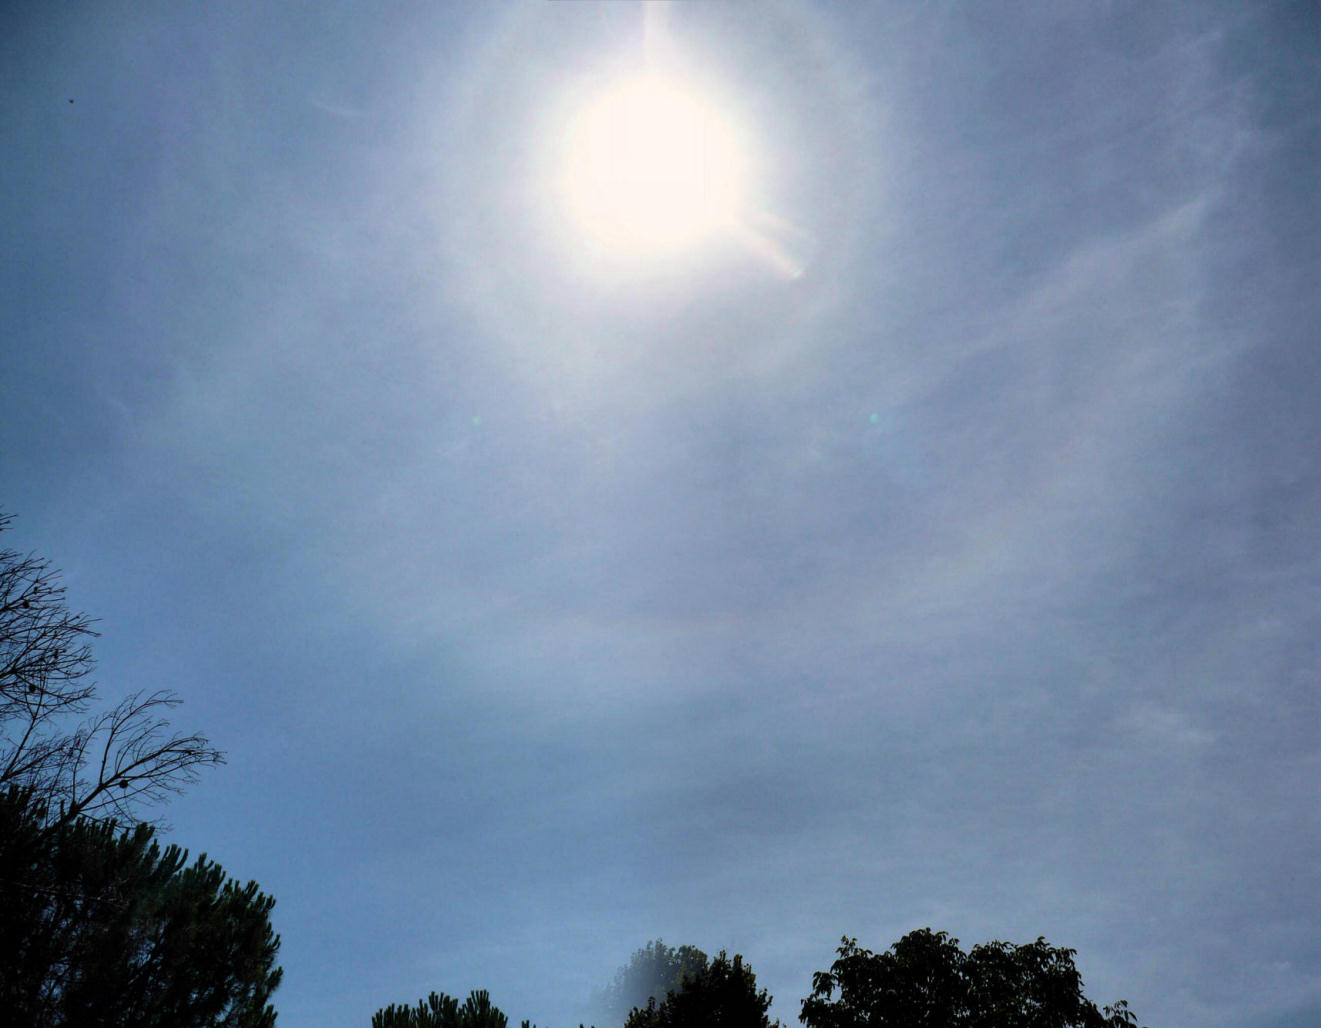 Solar Halos: 110 KB; click on the image to enlarge at 1321x1028 pixels